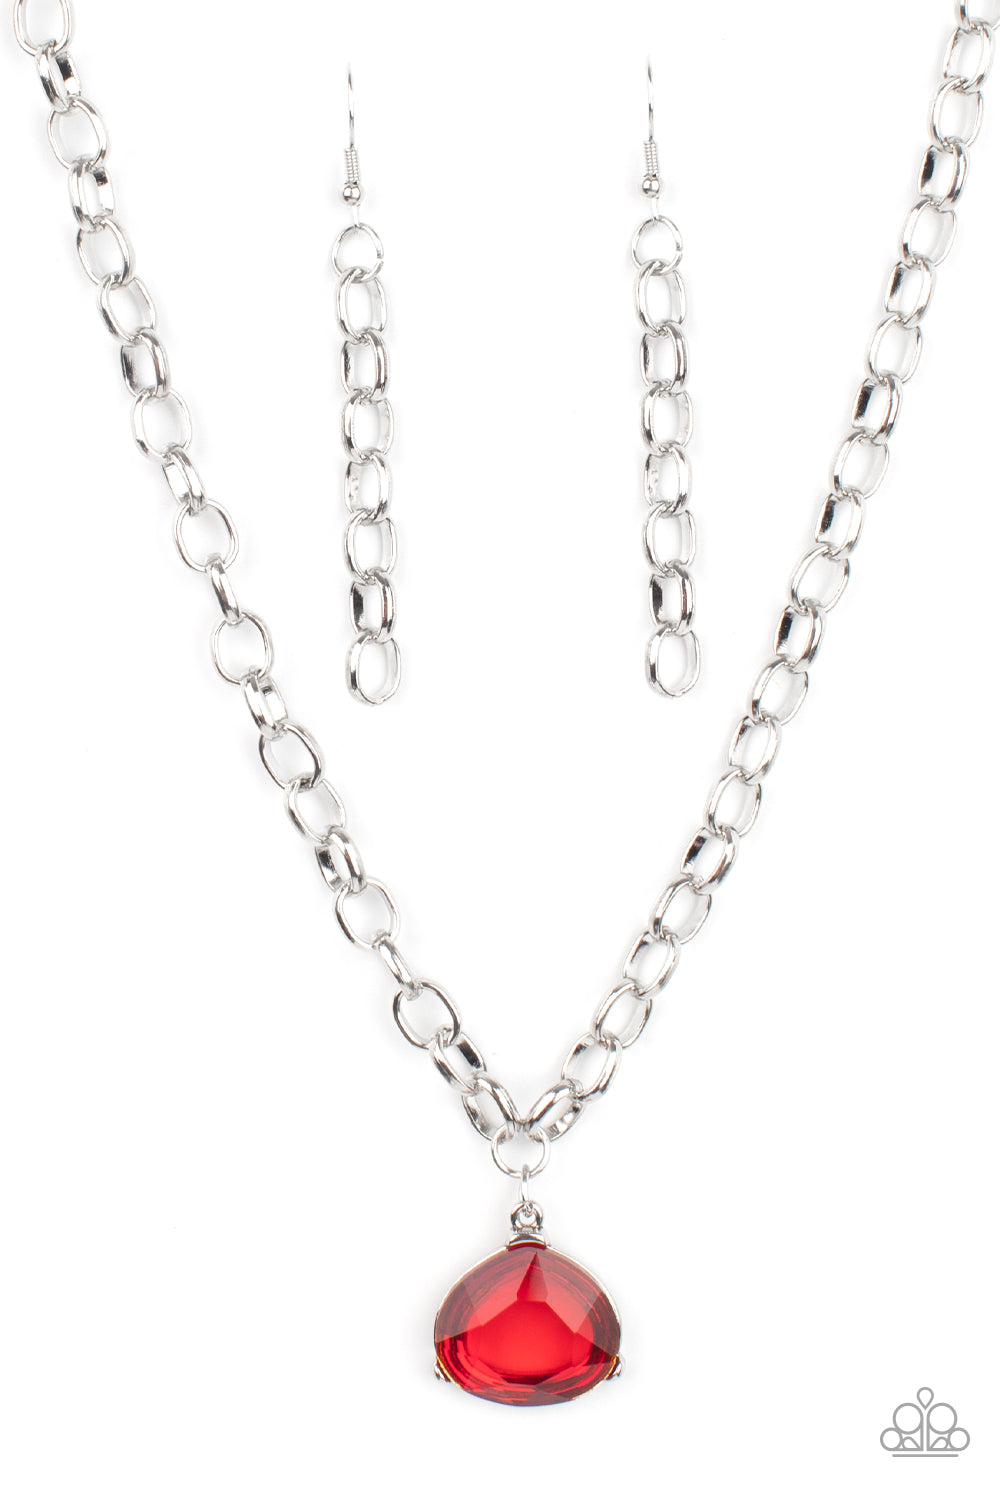 Gallery Gem Necklace (Red, Purple,Silver)